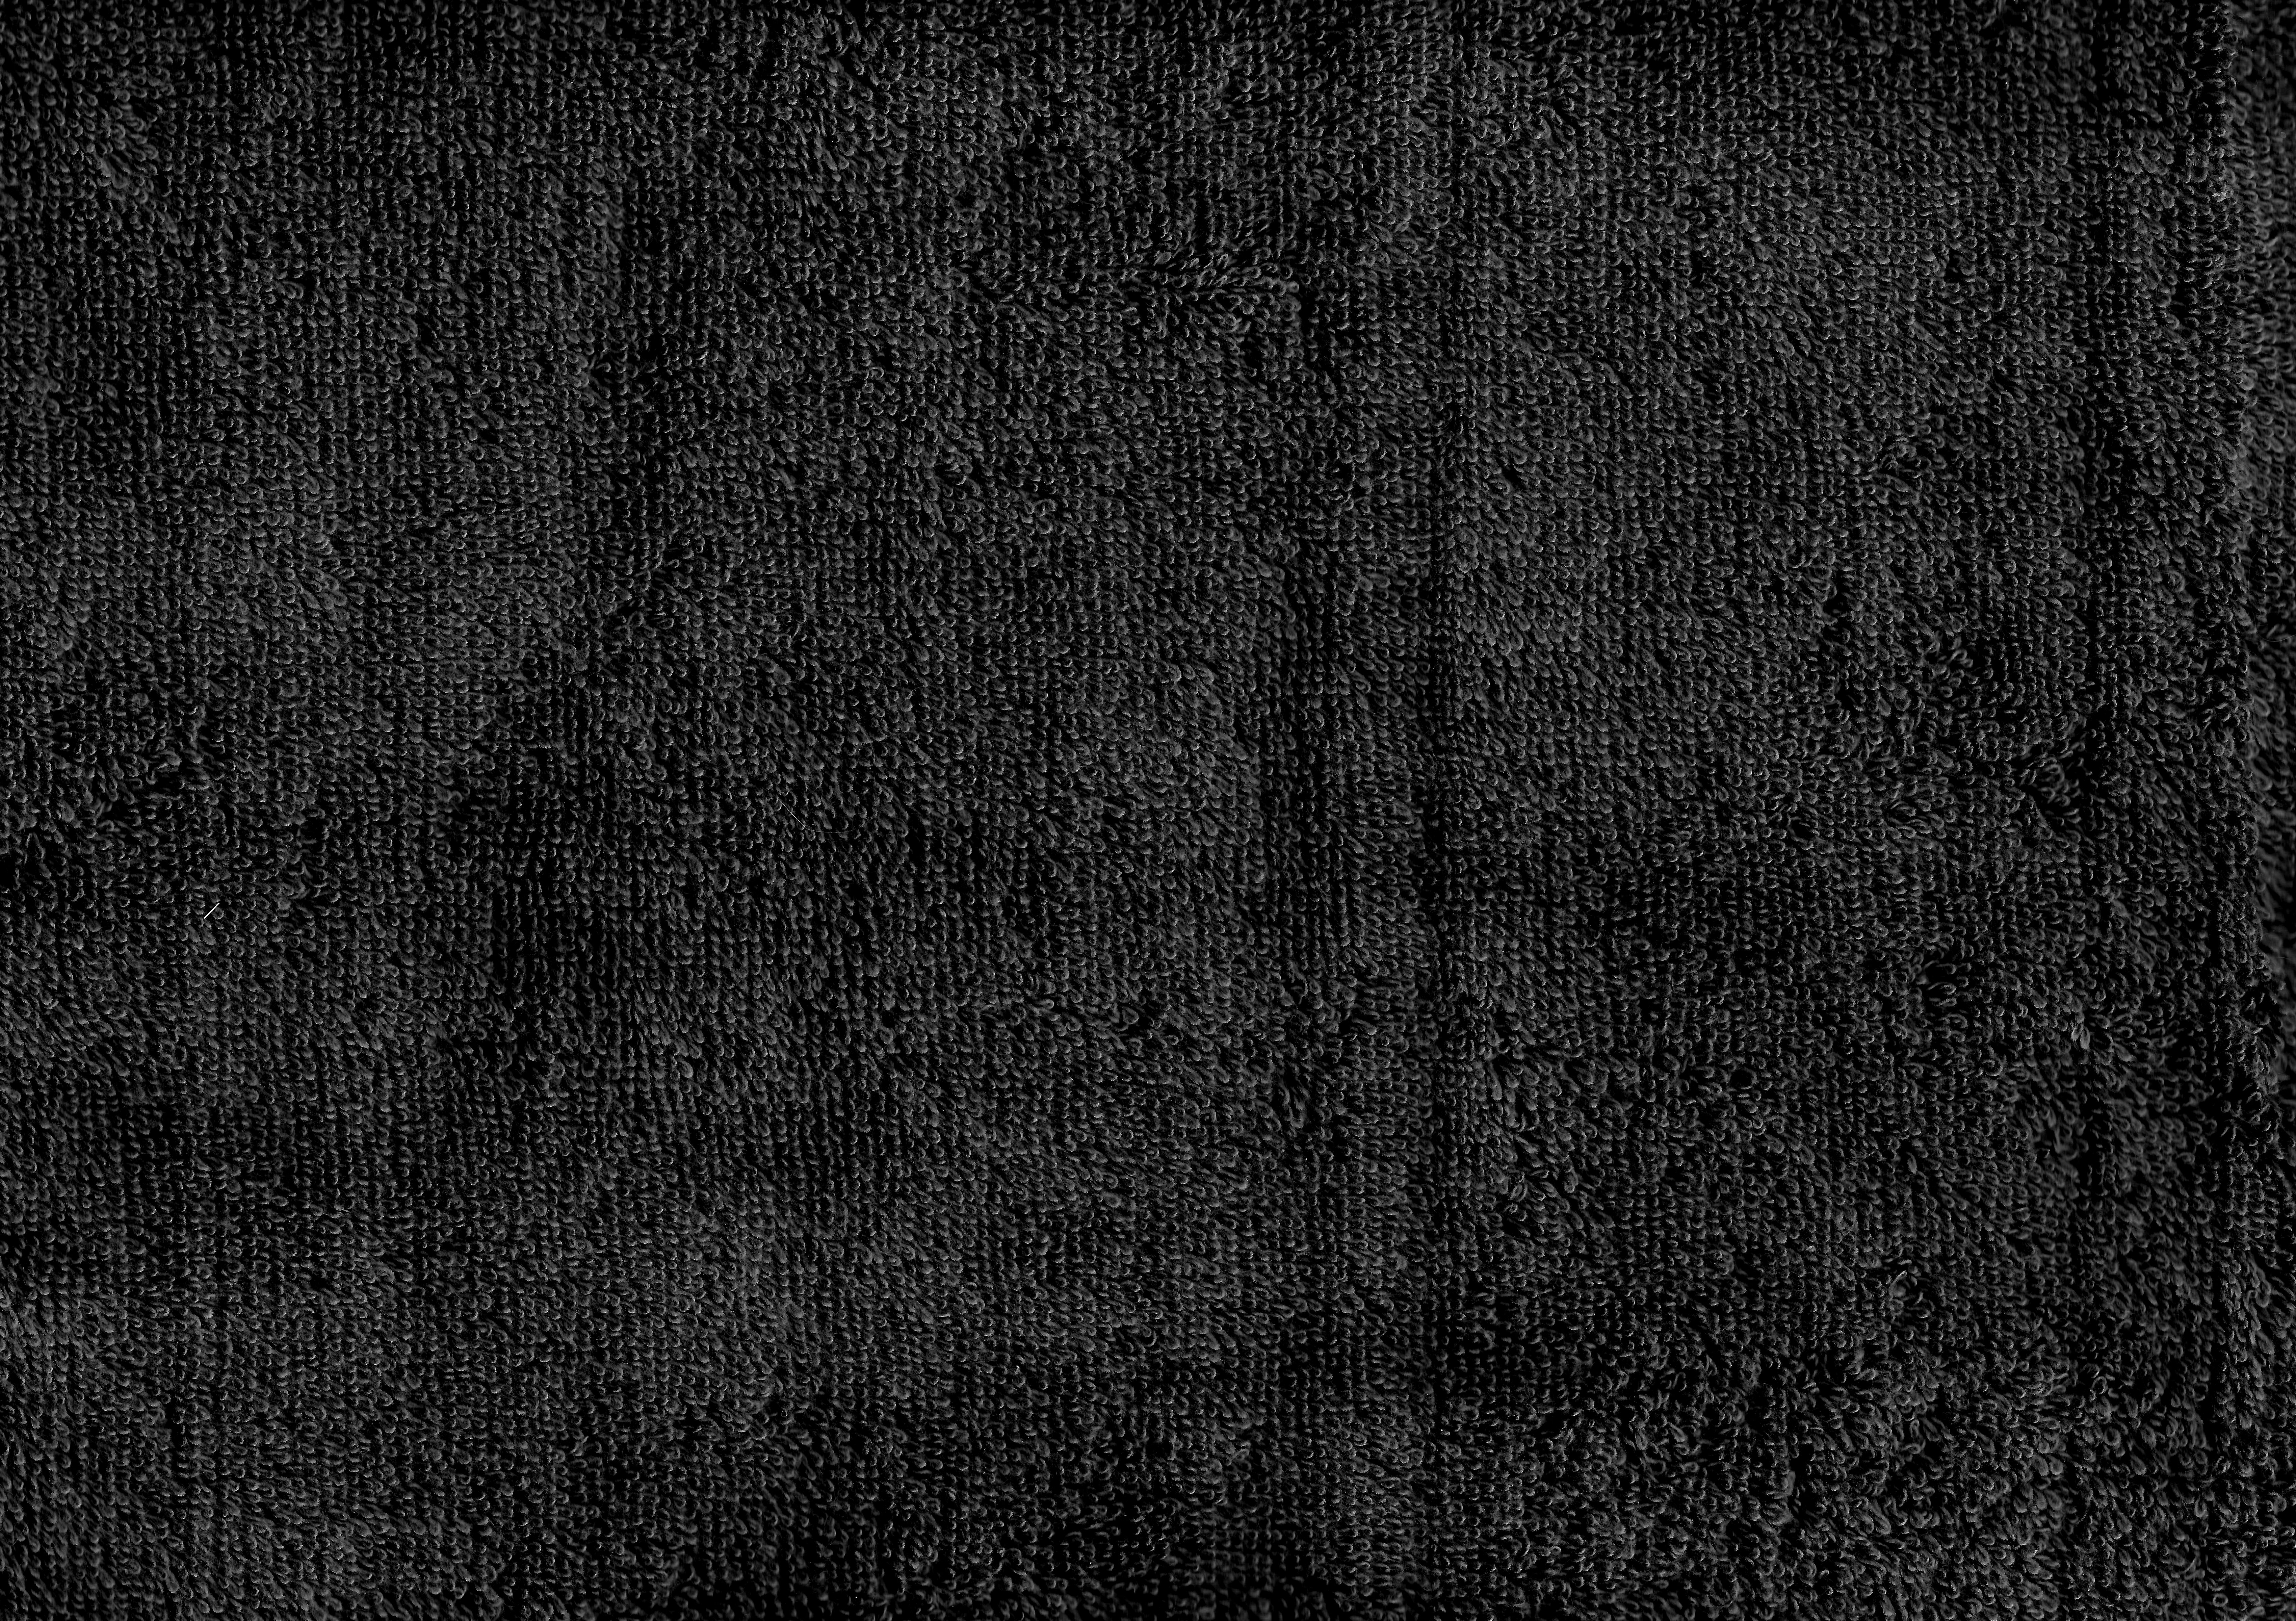 Black Terry Cloth Towel Texture Picture, Free Photograph